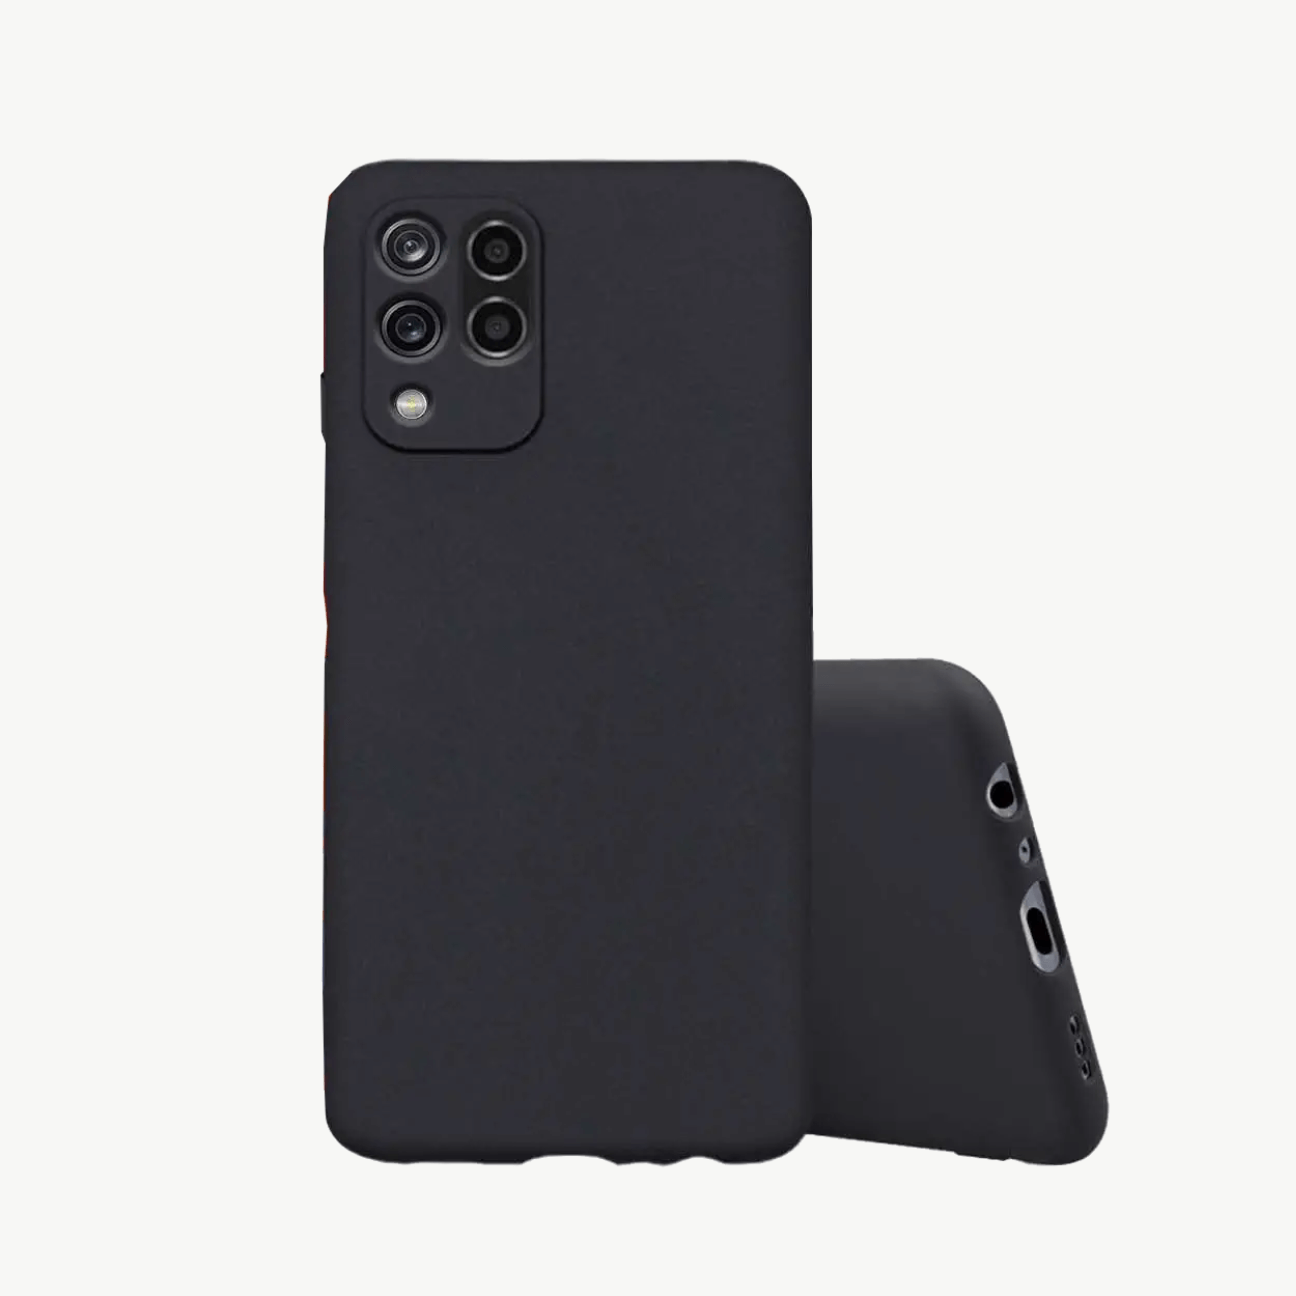 Oppo A3s Black Soft Silicone Phone Case